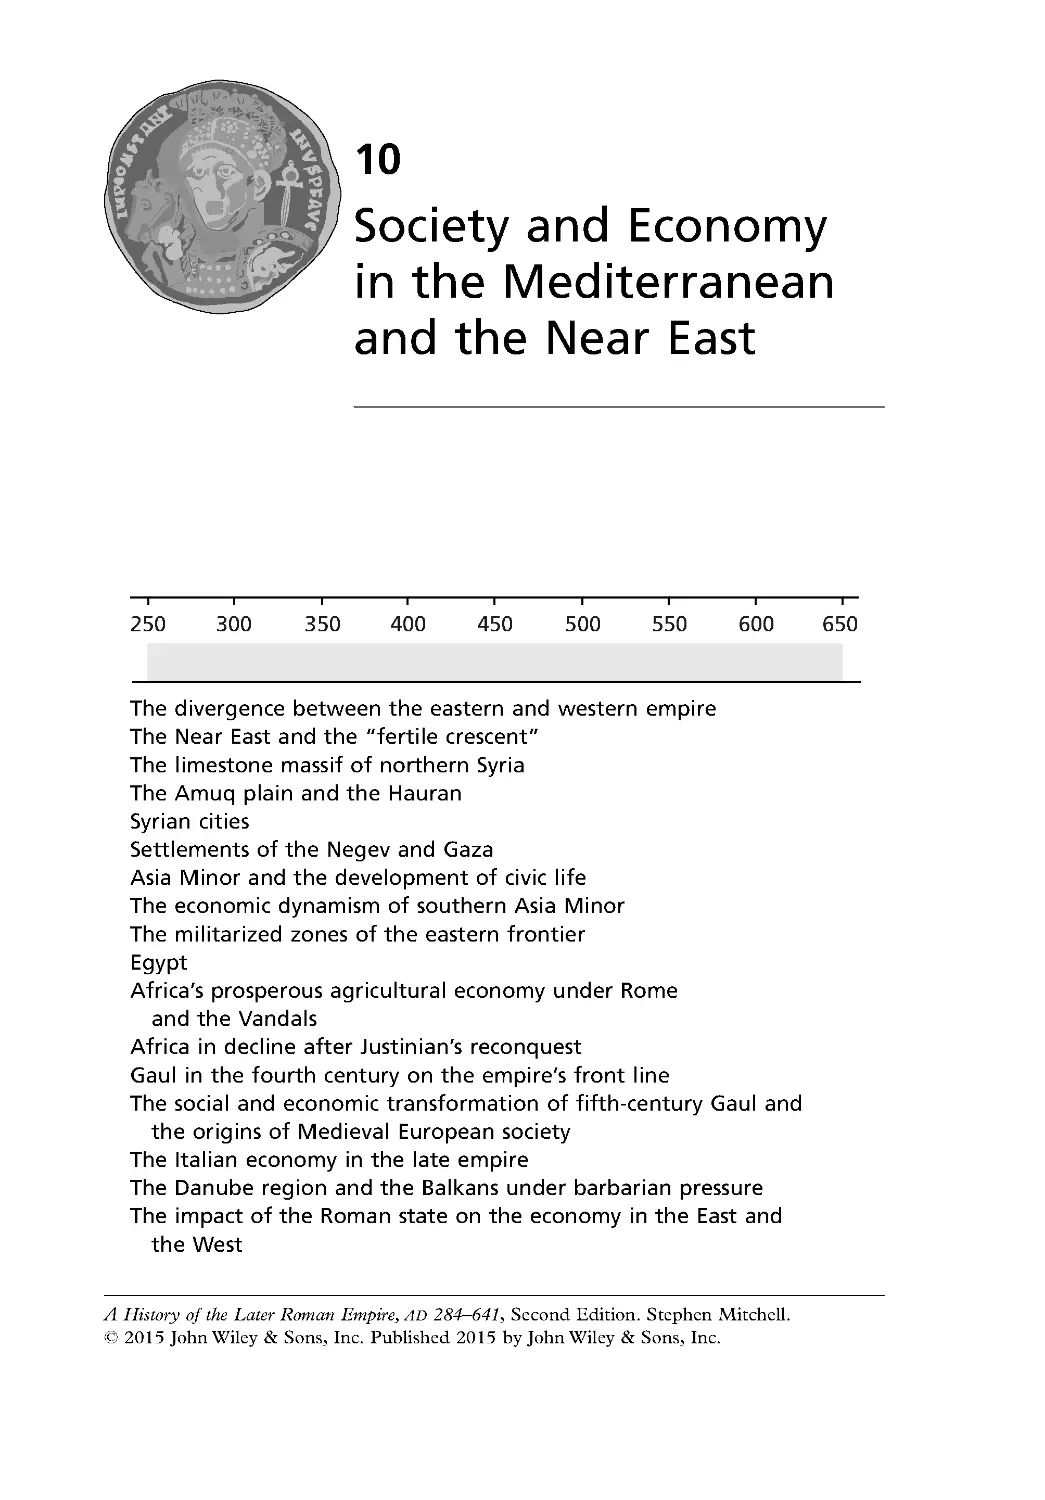 10: Society and Economy in the Mediterranean and the Near East